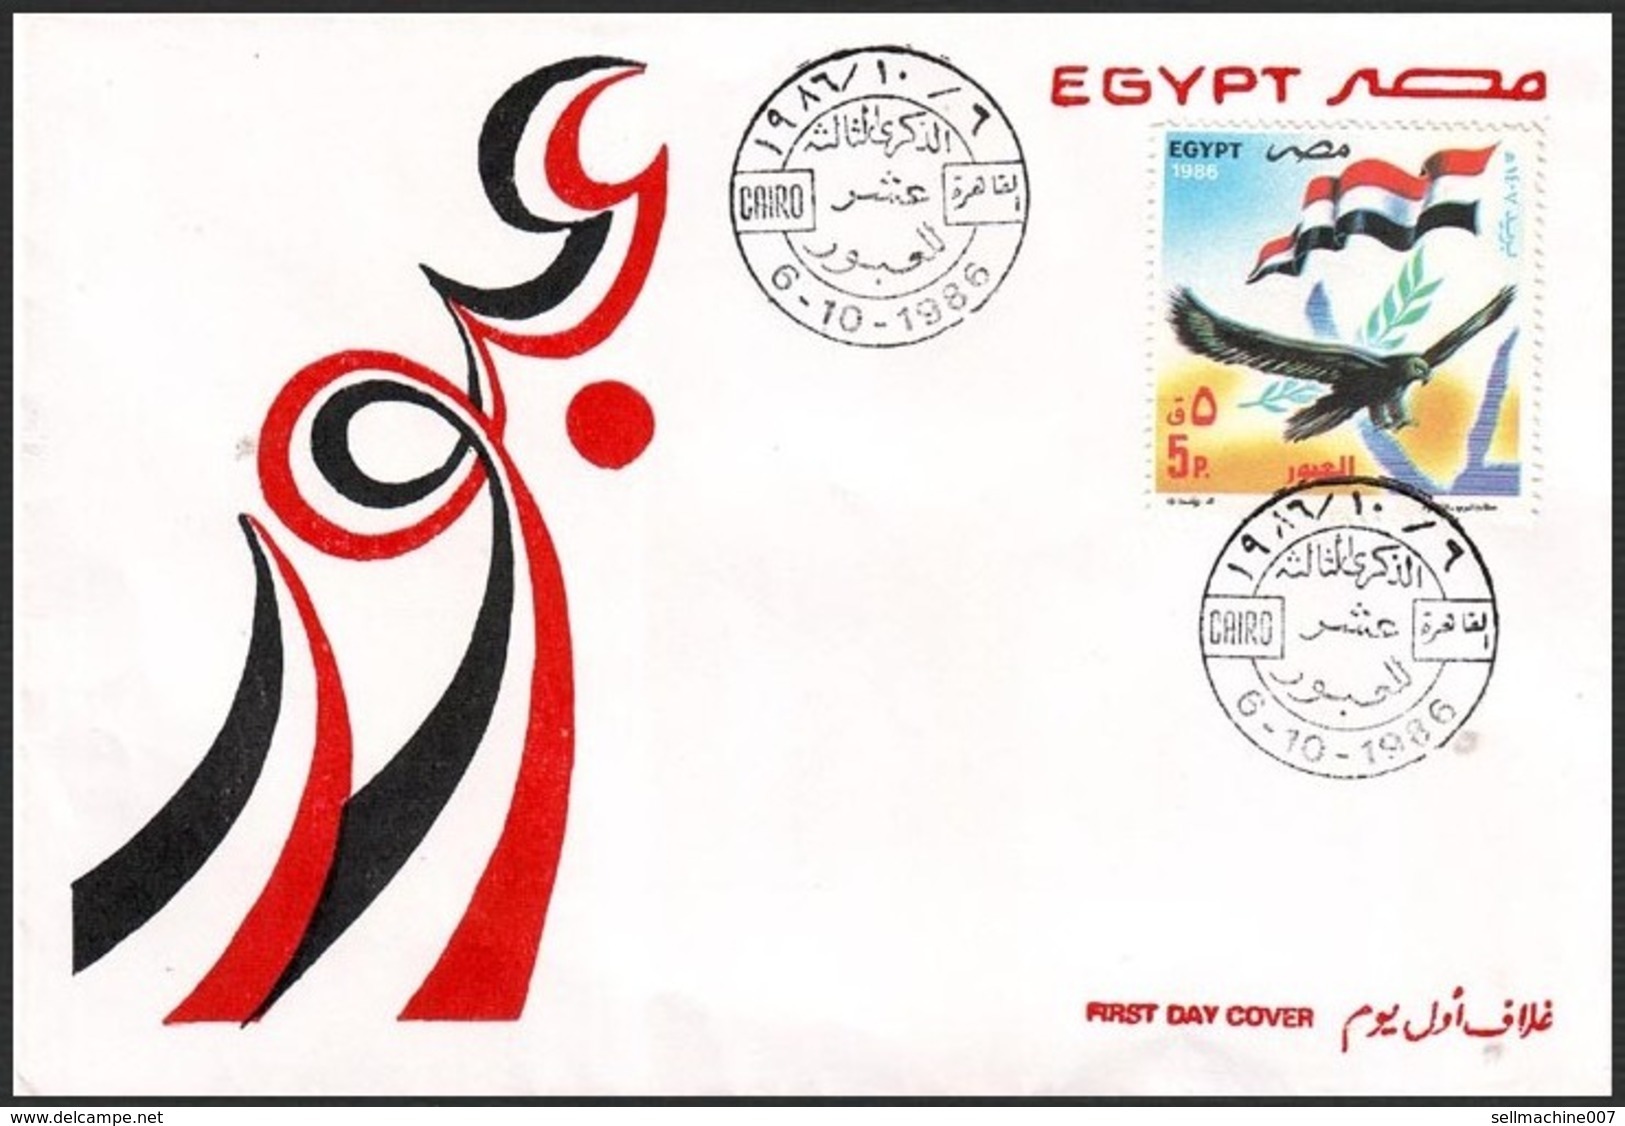 Egypt FDC 1973 - 1986 First Day Cover - October War Egypt VS Israel - Egyptian Flag - Crossing Suez Canal - Covers & Documents